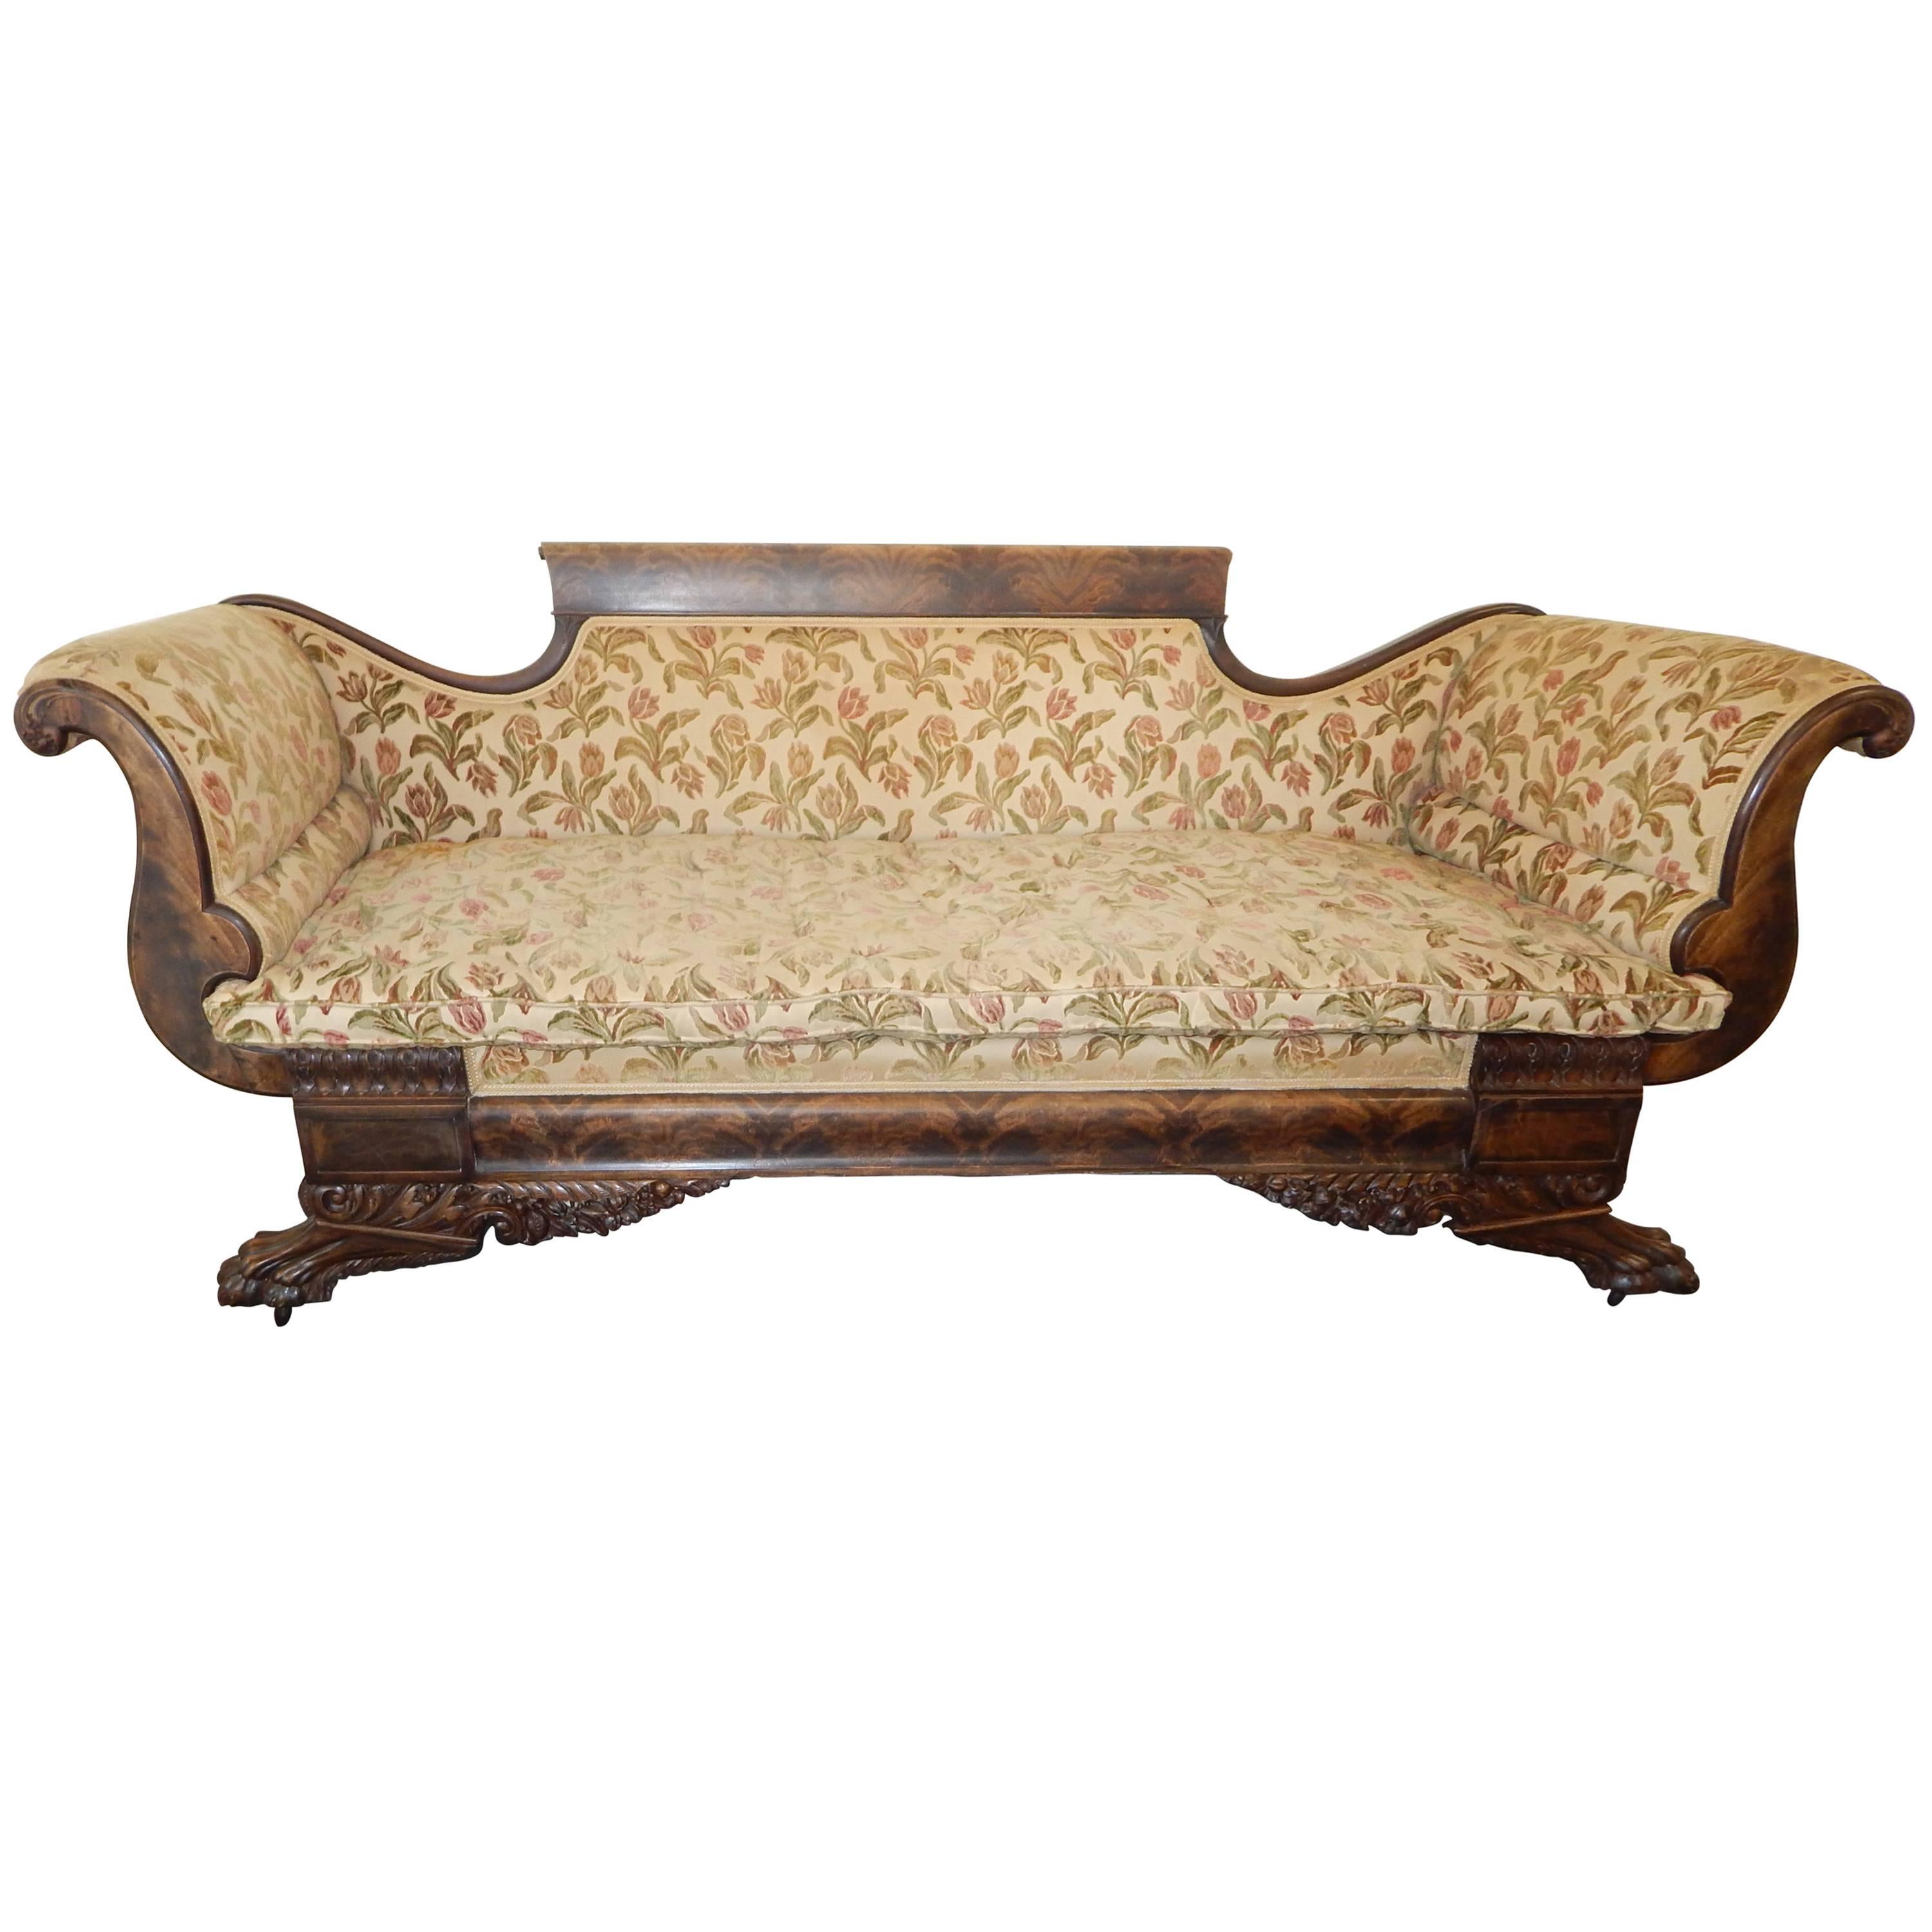  American Empire Carved Mahogany Settee For Sale